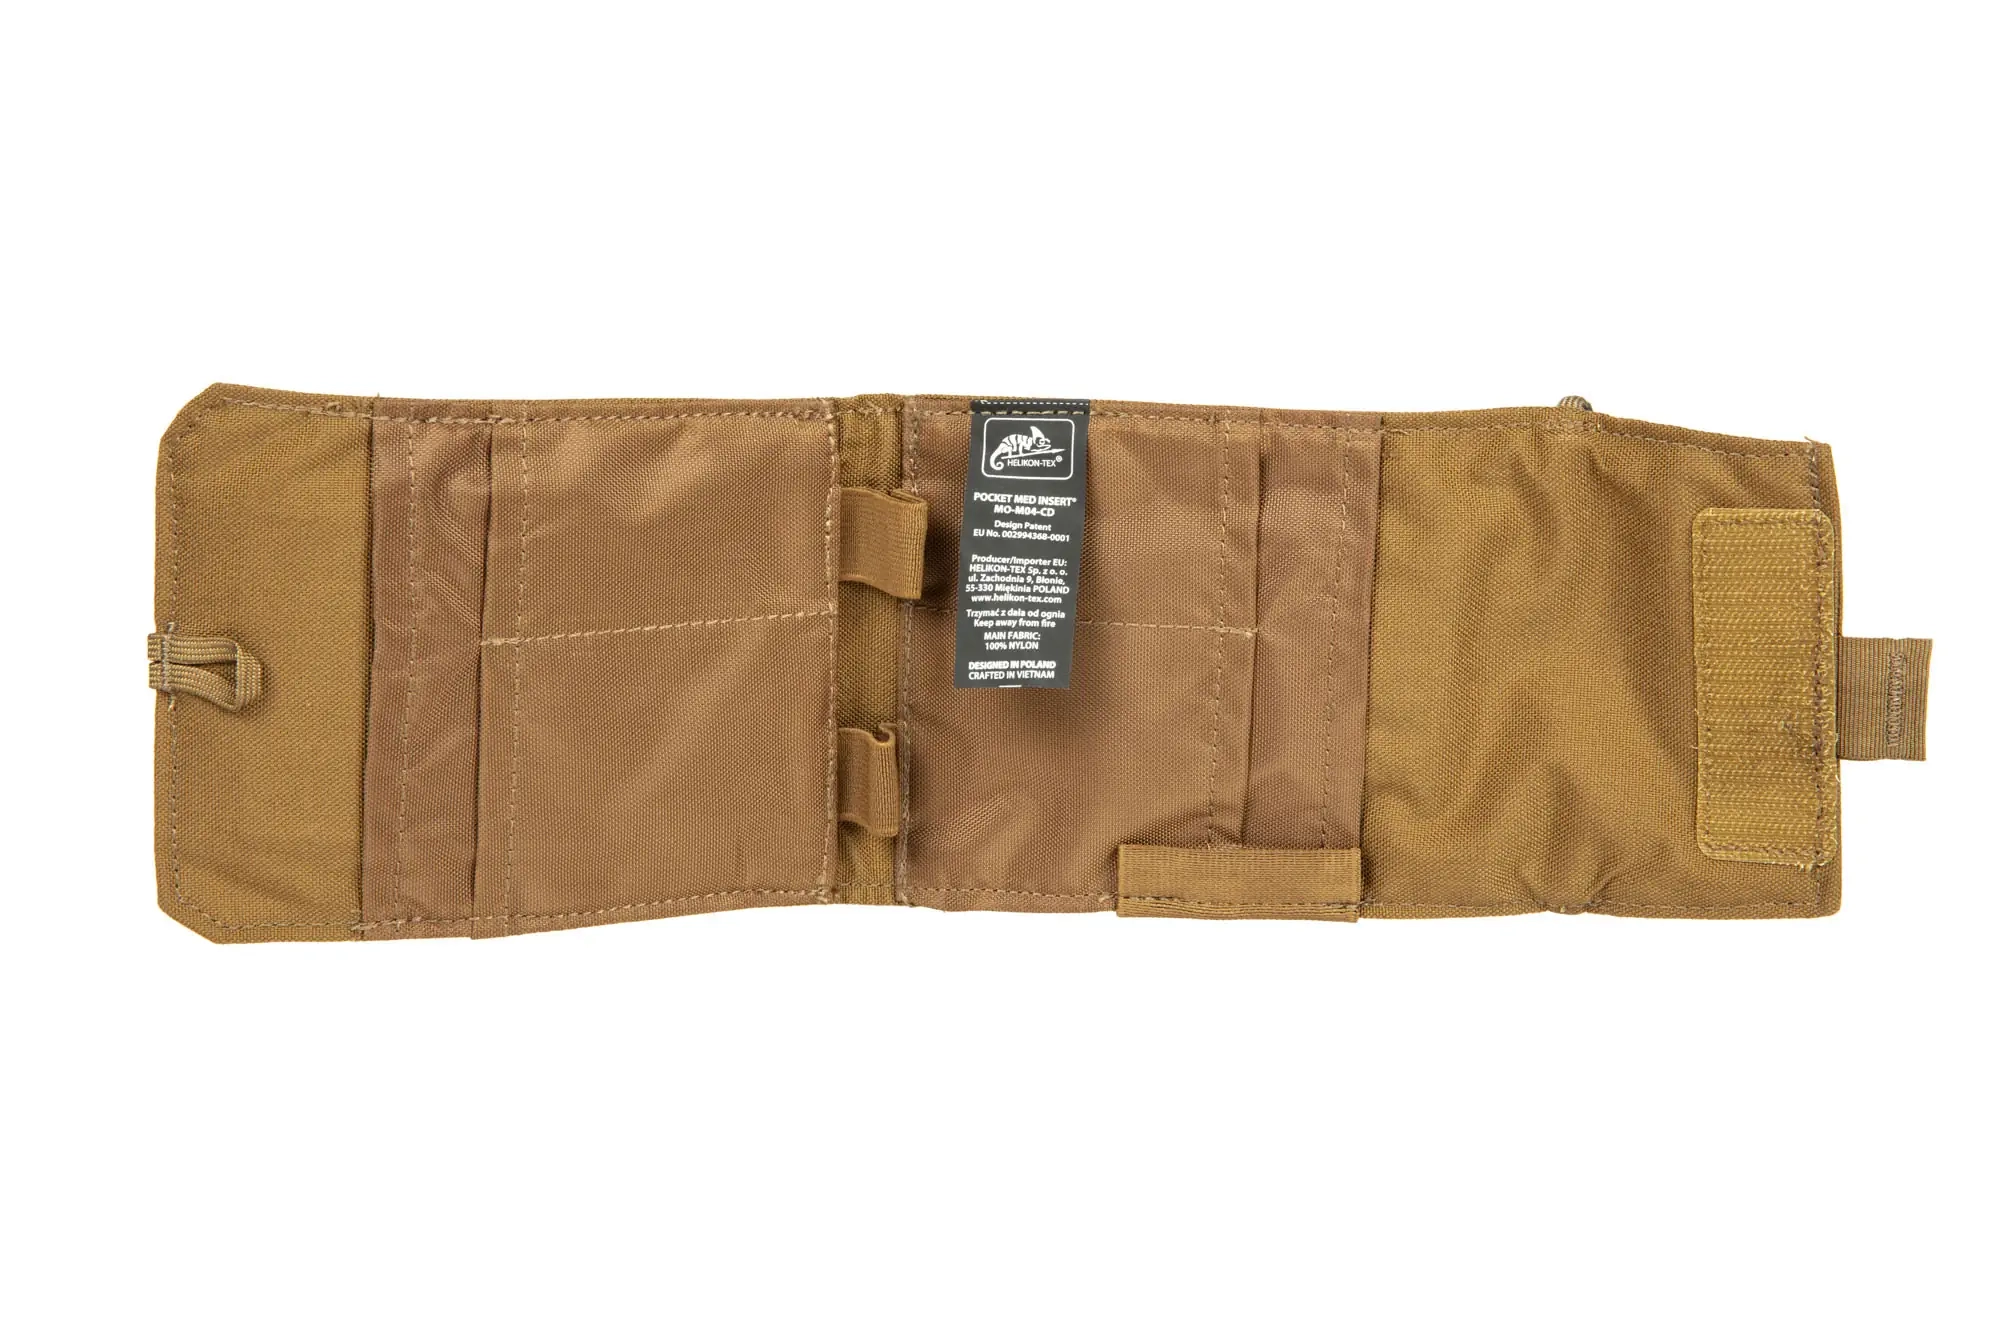 MED INSERT® Cordura® Pouch - Coyote Brown